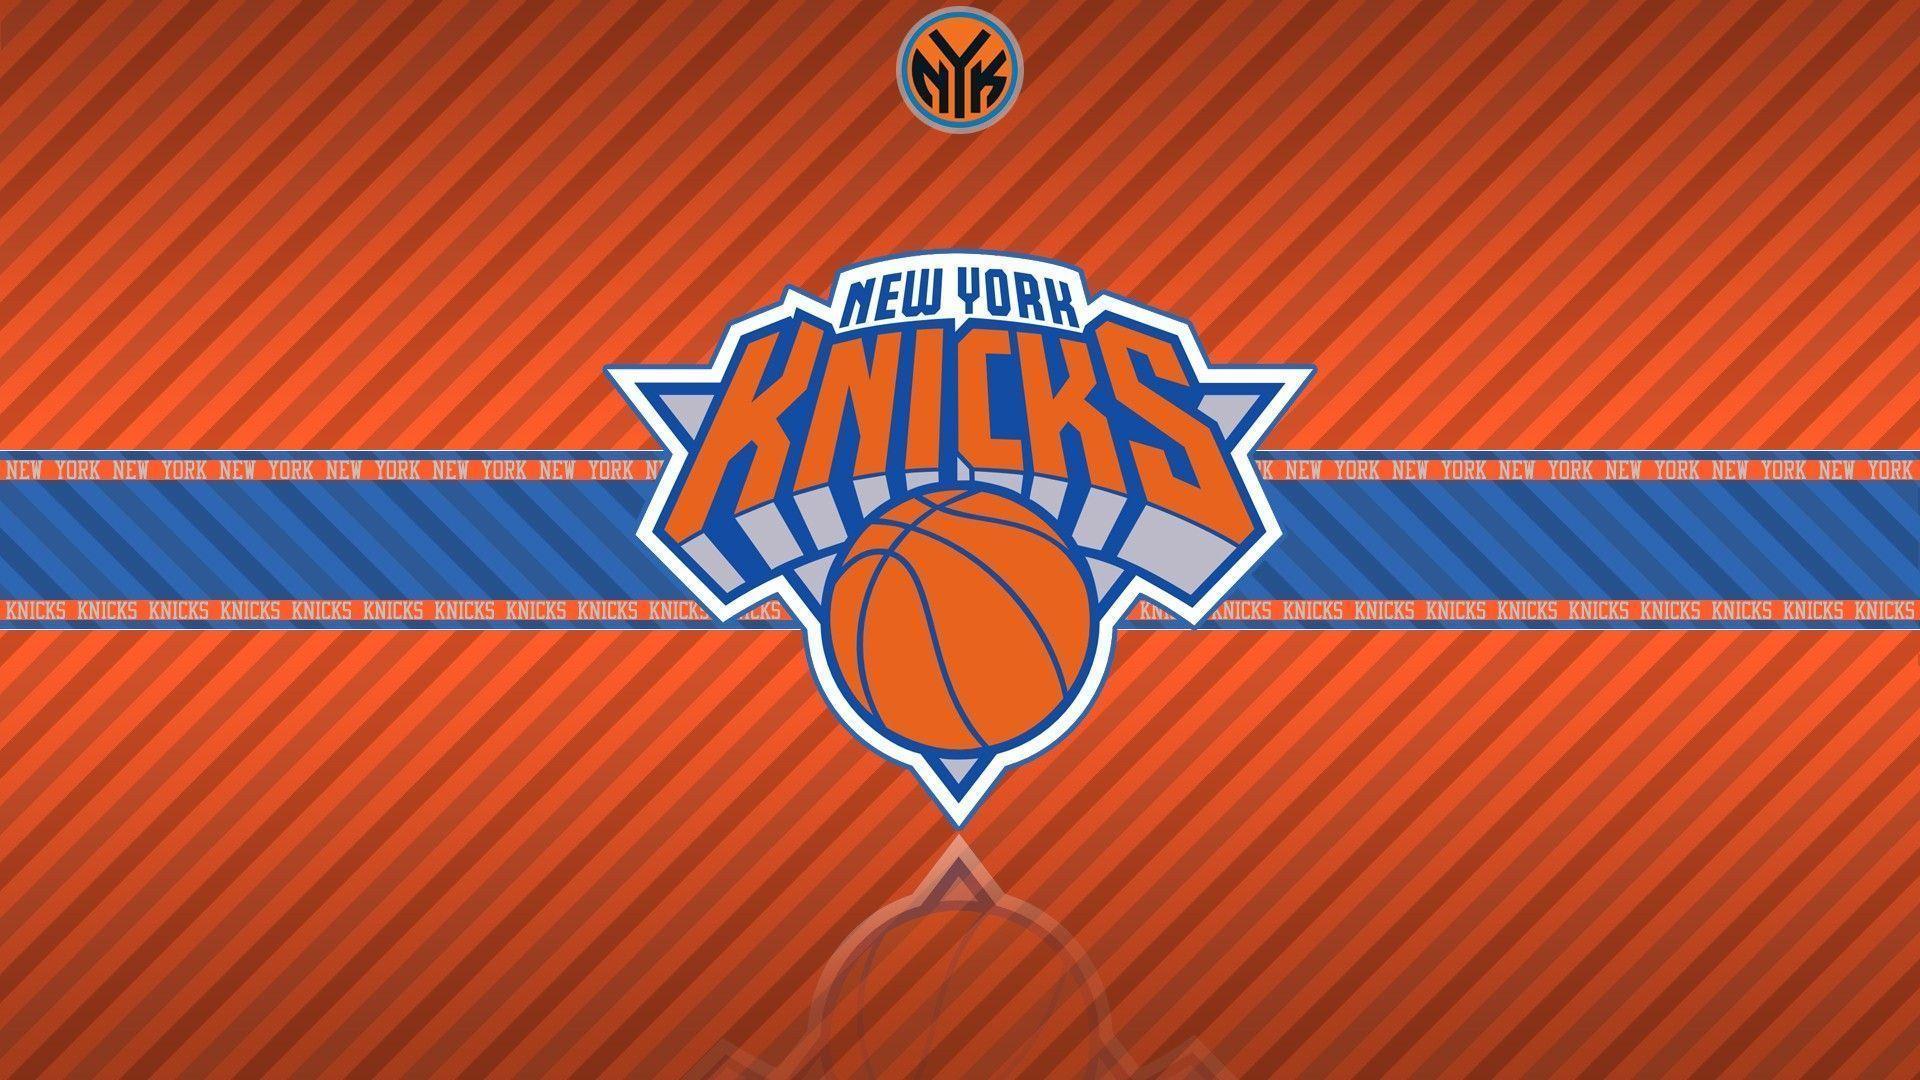 10 new york knicks iphone wallpapers wallpaperboat on new york knicks wallpapers